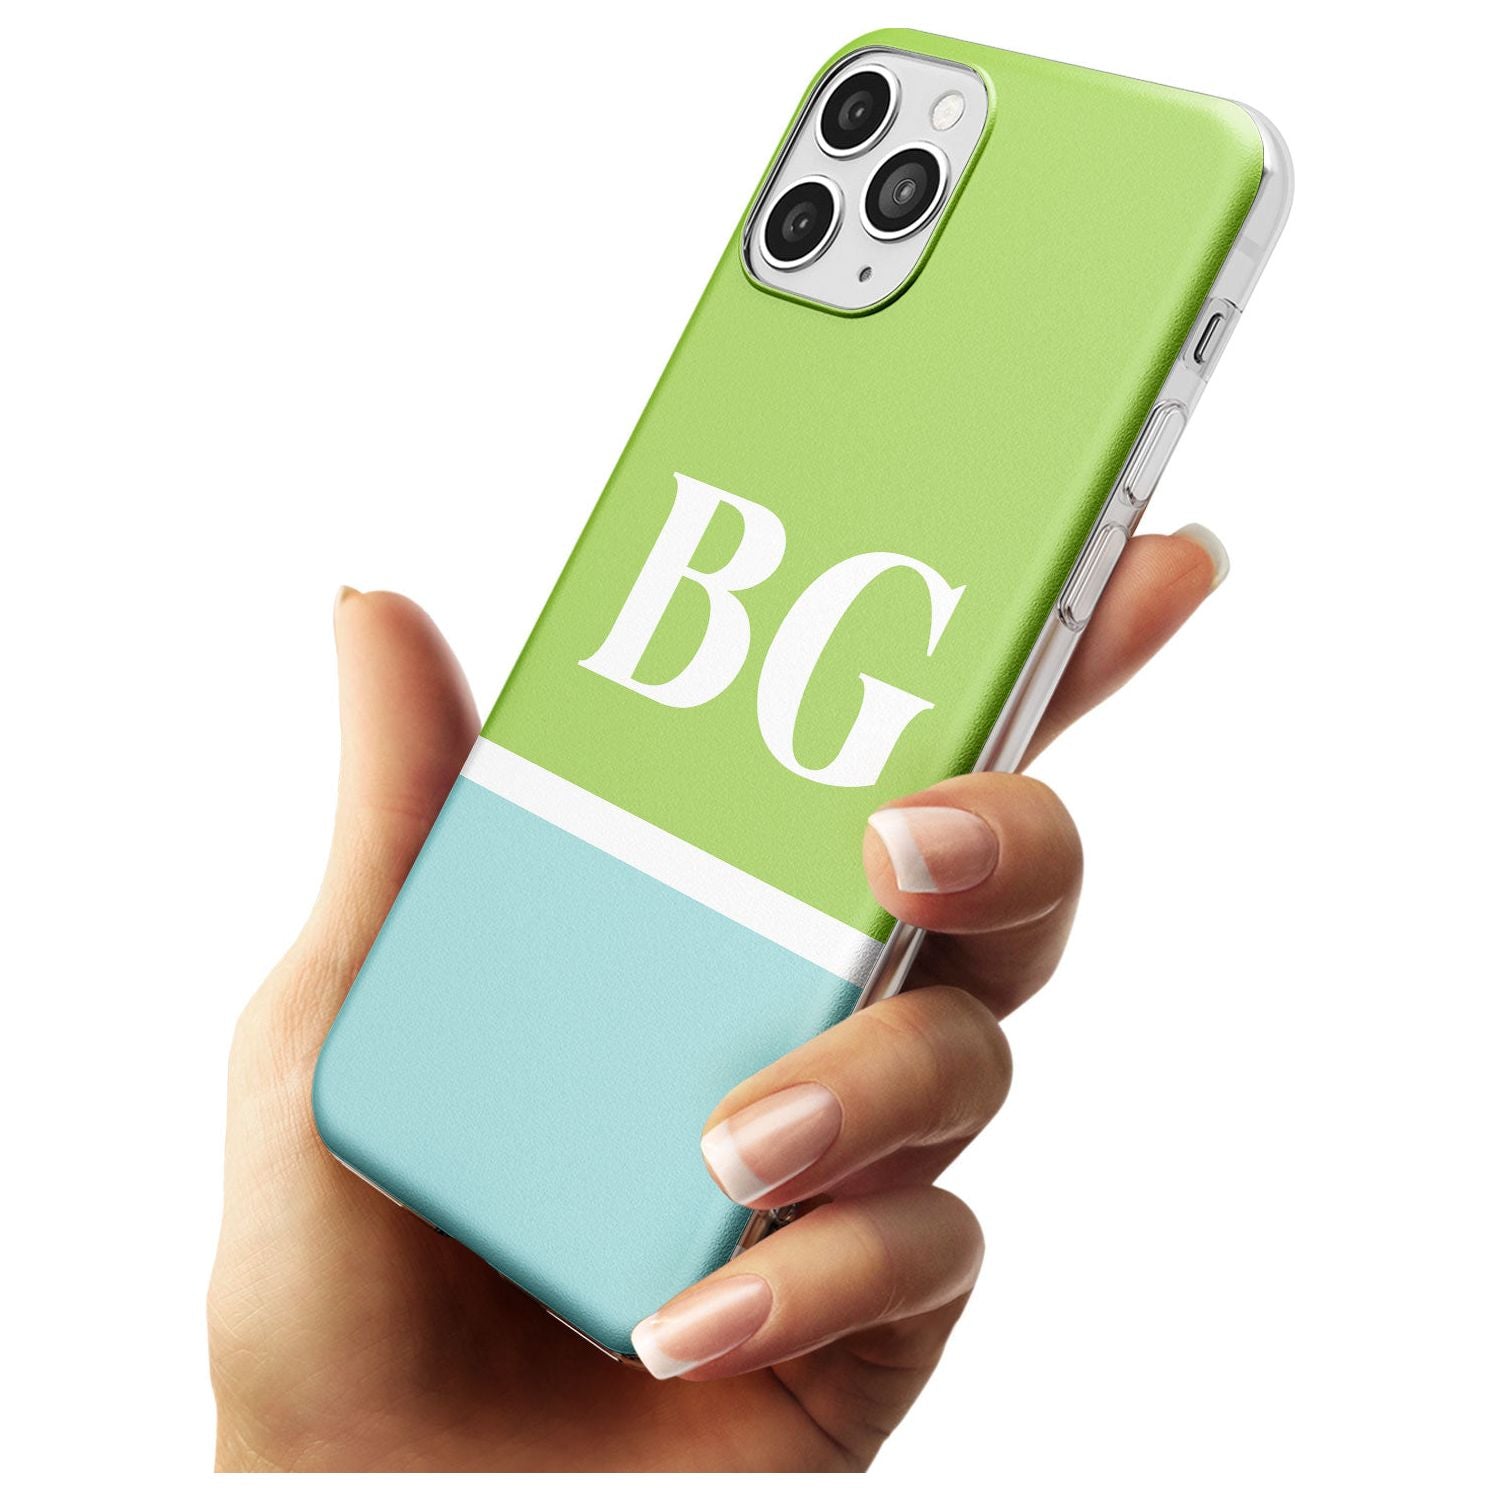 Colourblock: Green & Turquoise Slim TPU Phone Case for iPhone 11 Pro Max